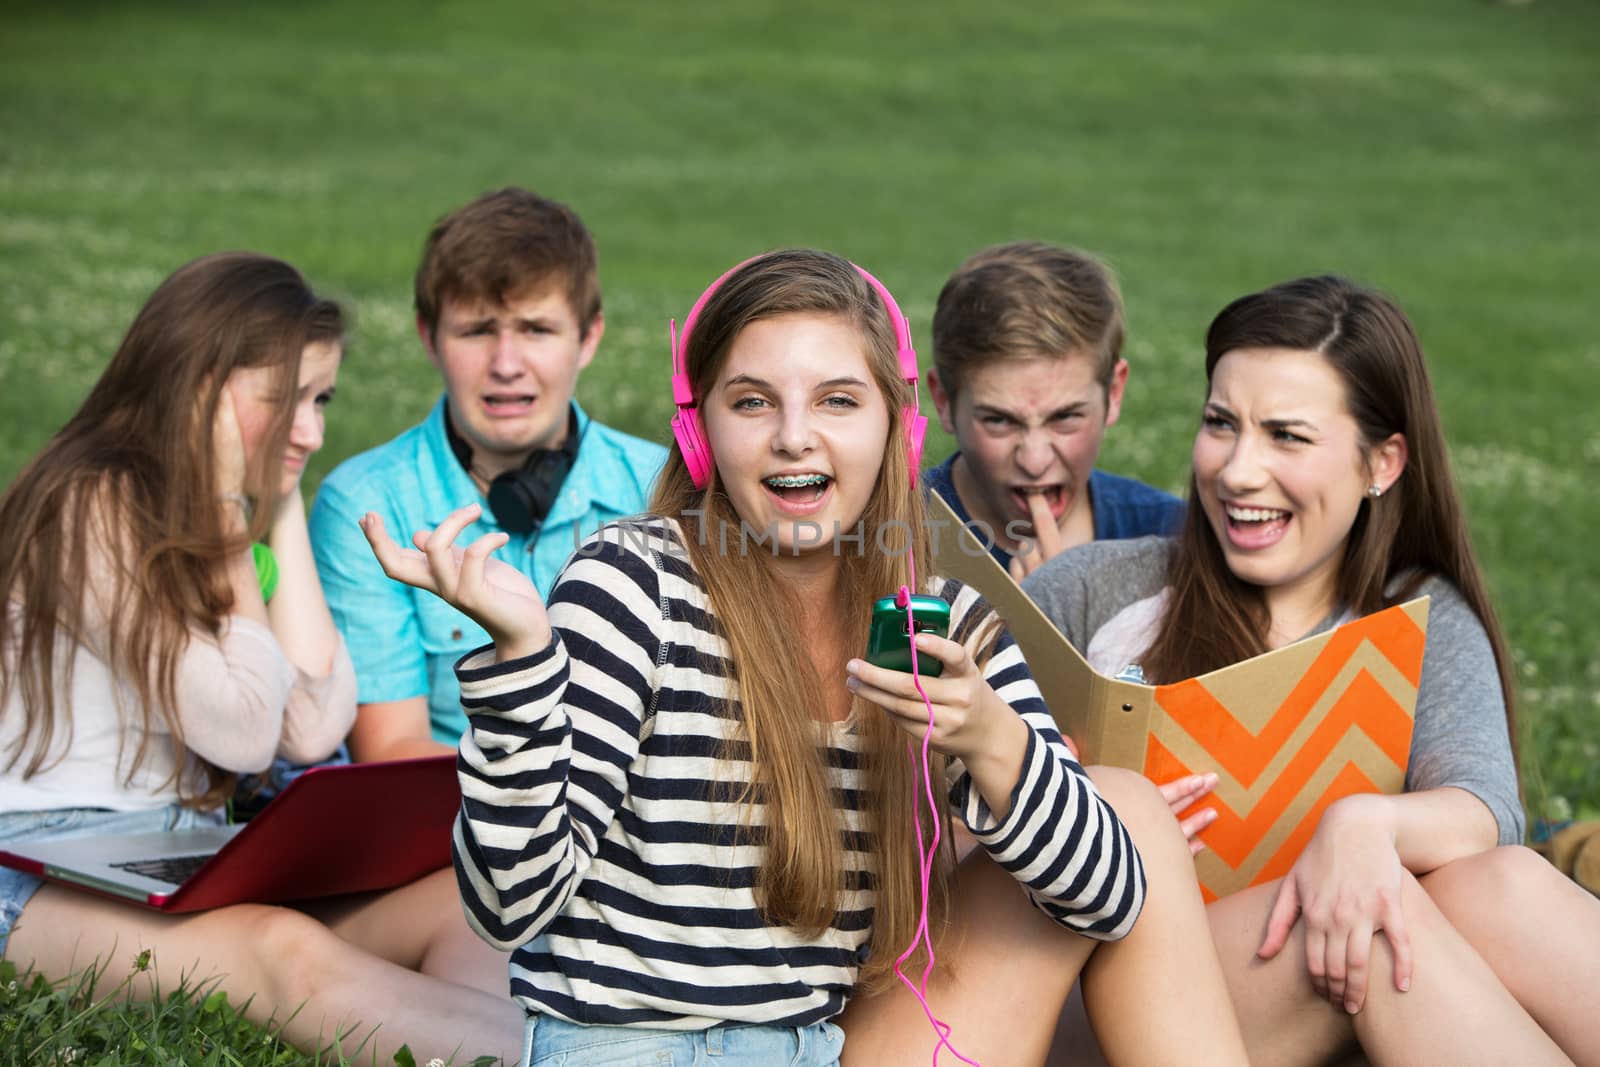 Singing teenage girl annoying friends studying outdoors